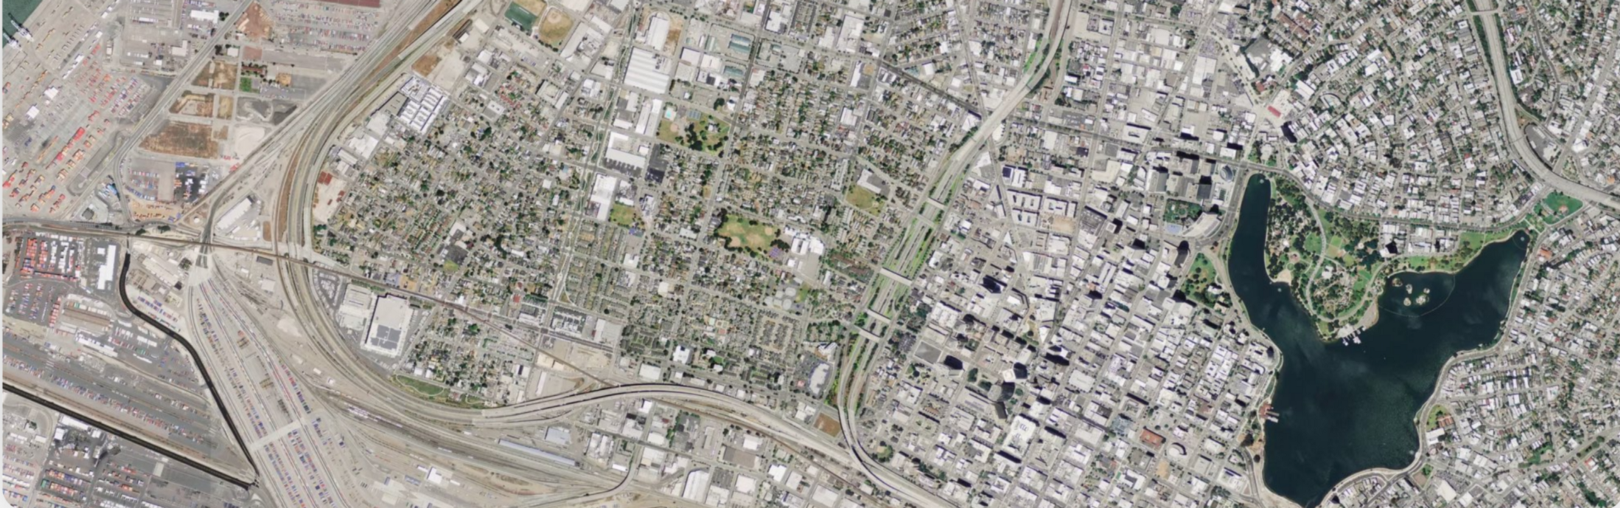 Aerial View of West Oakland